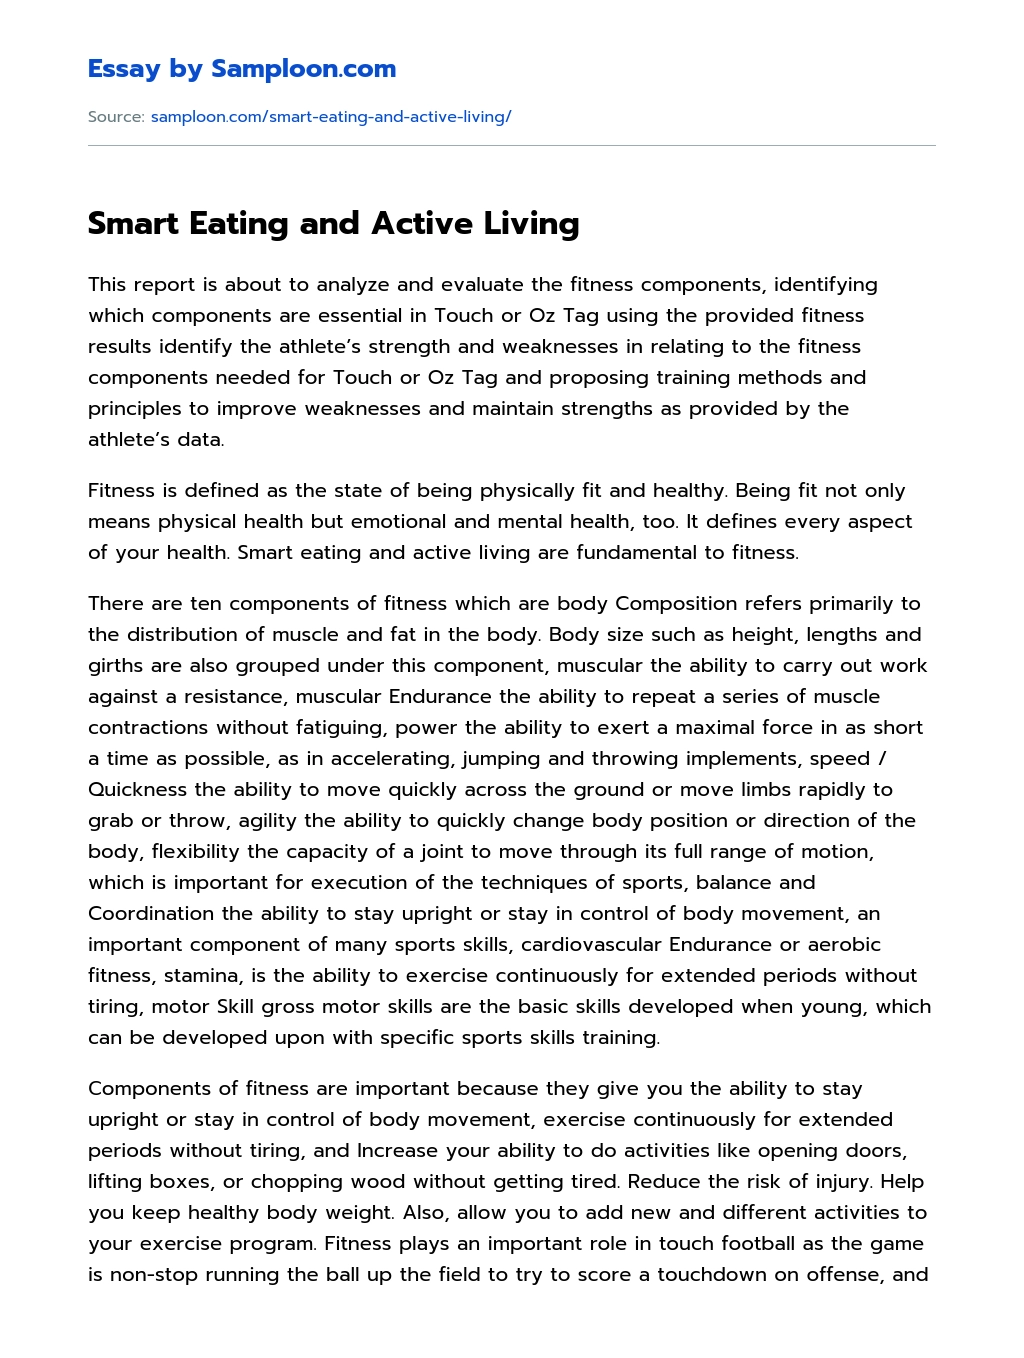 Smart Eating and Active Living essay